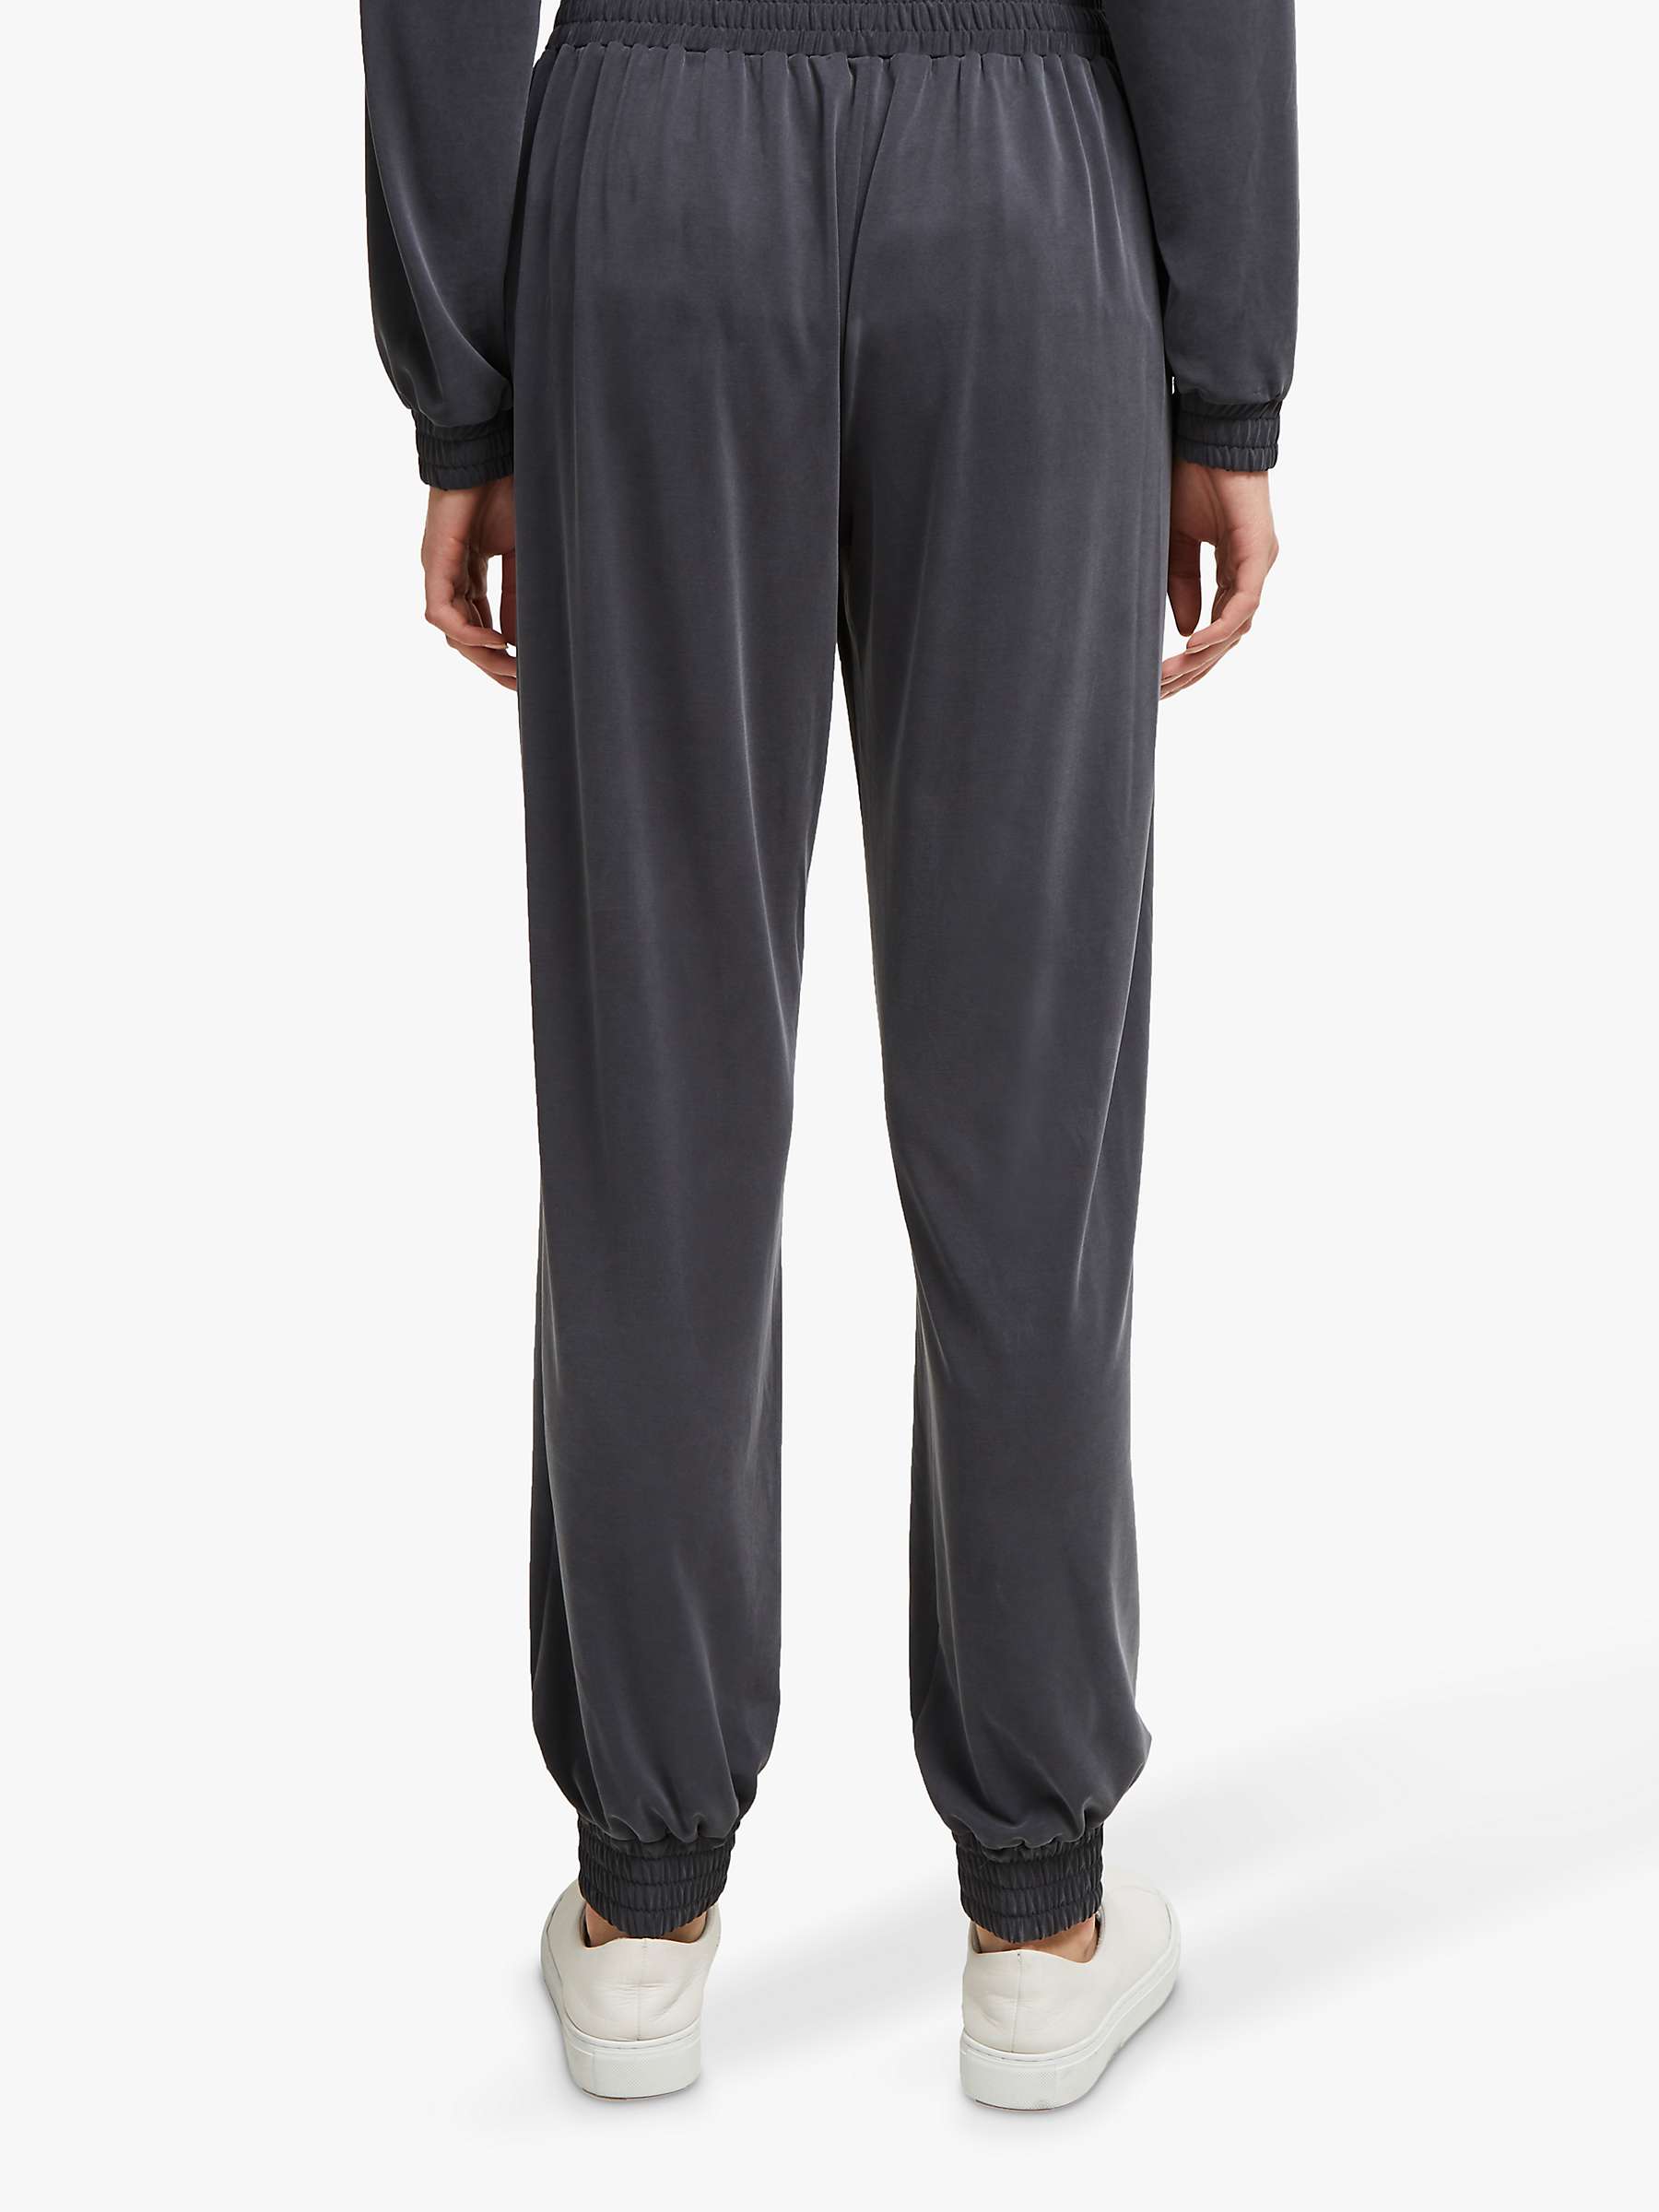 Buy French Connection Washed Cupro Joggers, Black Online at johnlewis.com